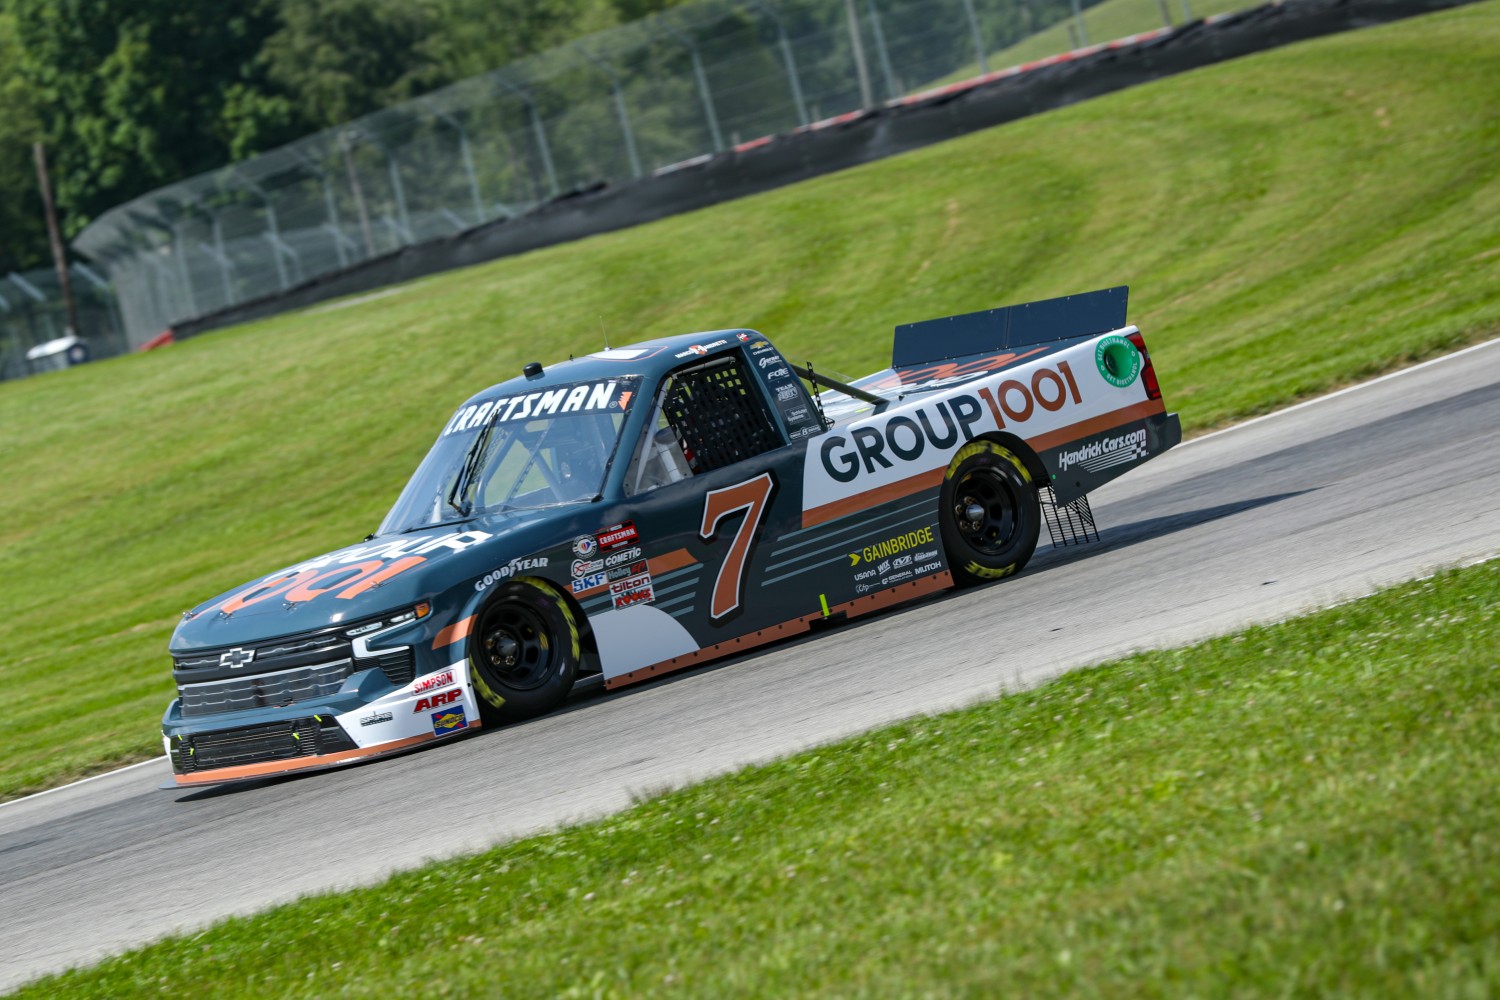 Marco Andretti, driver of the #7 Group1001 Chevrolet, drives during practice for the NASCAR Craftsman Truck Series O'Reilly Auto Parts 150 at Mid-Ohio Sports Car Course on July 07, 2023 in Lexington, Ohio. (Photo by Meg Oliphant/Getty Images)